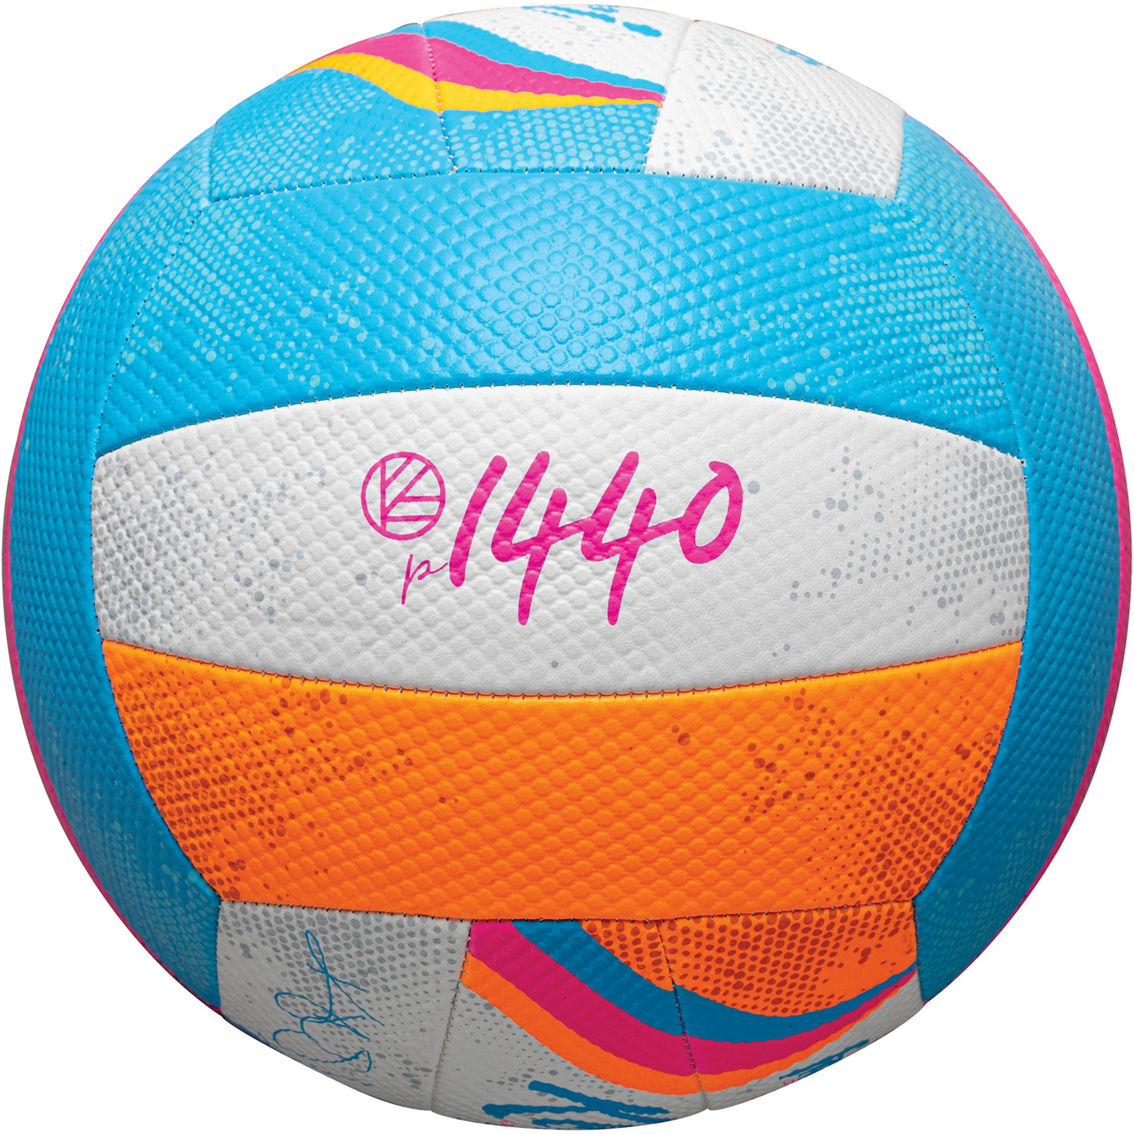 Franklin Official Size Kerri Walsh Jennings National Replica Beach Volleyball - Image 2 of 5